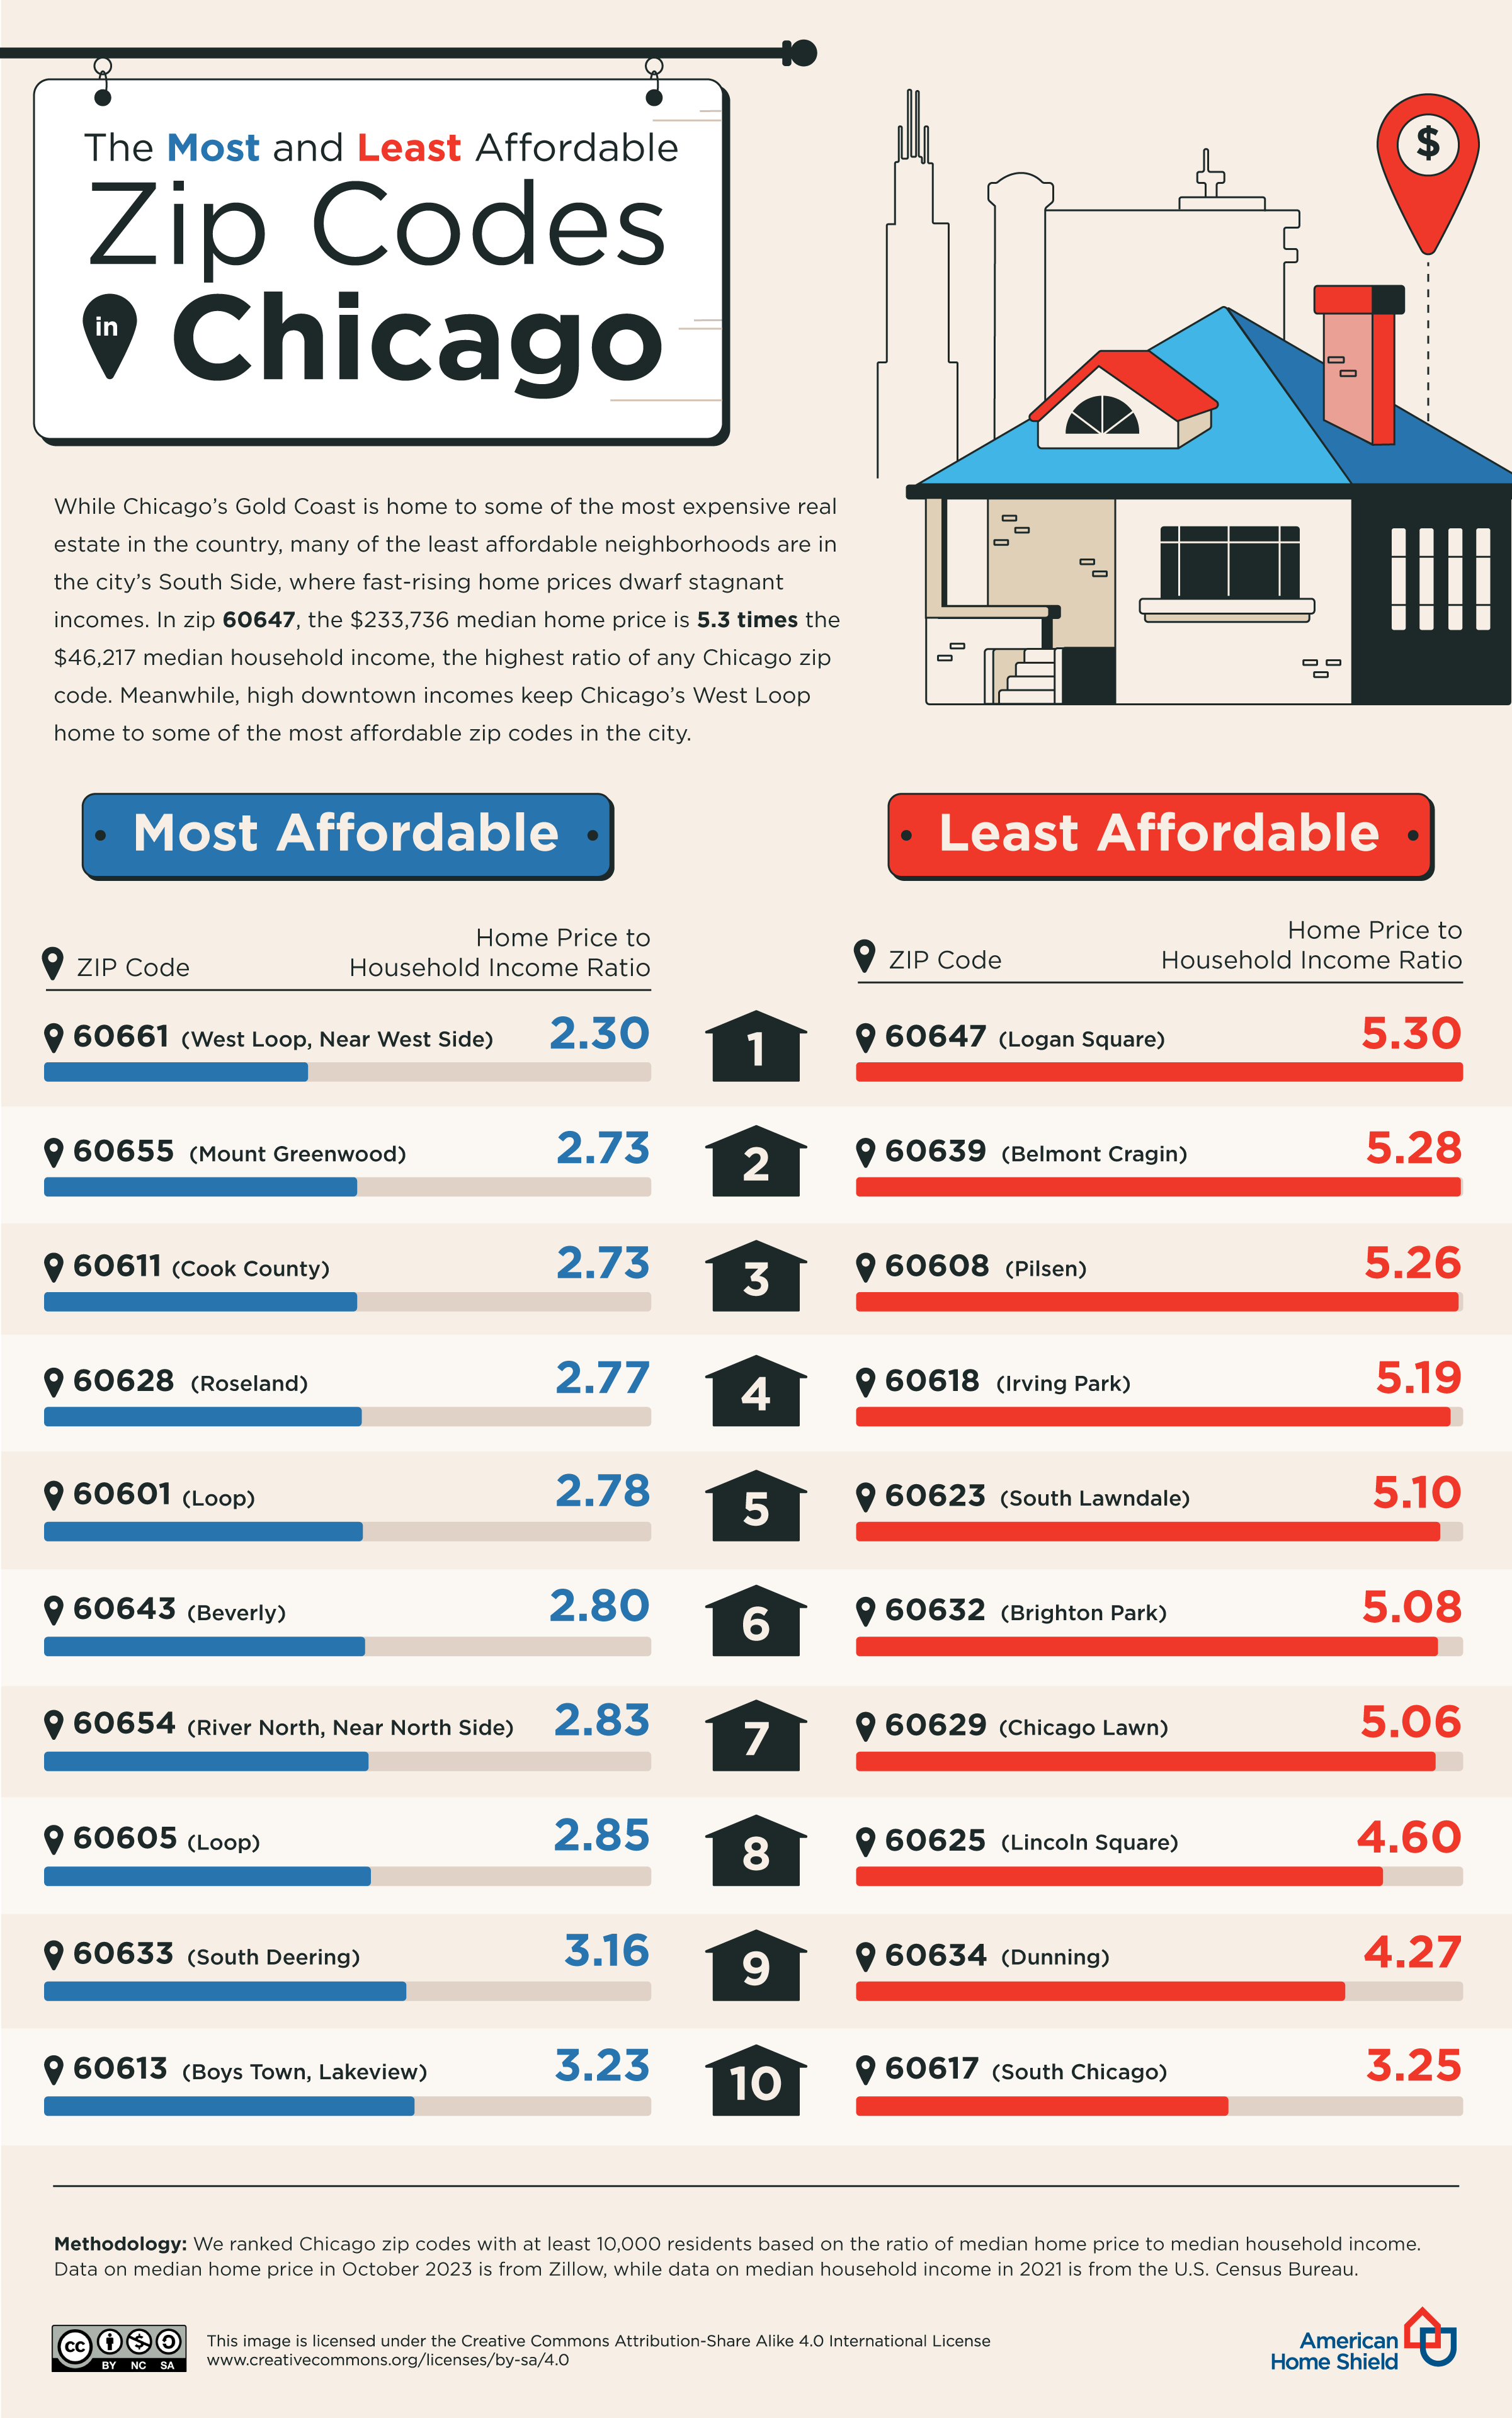 The-Most-and-Least-Affordable-Zip-Codes-in-Chicago